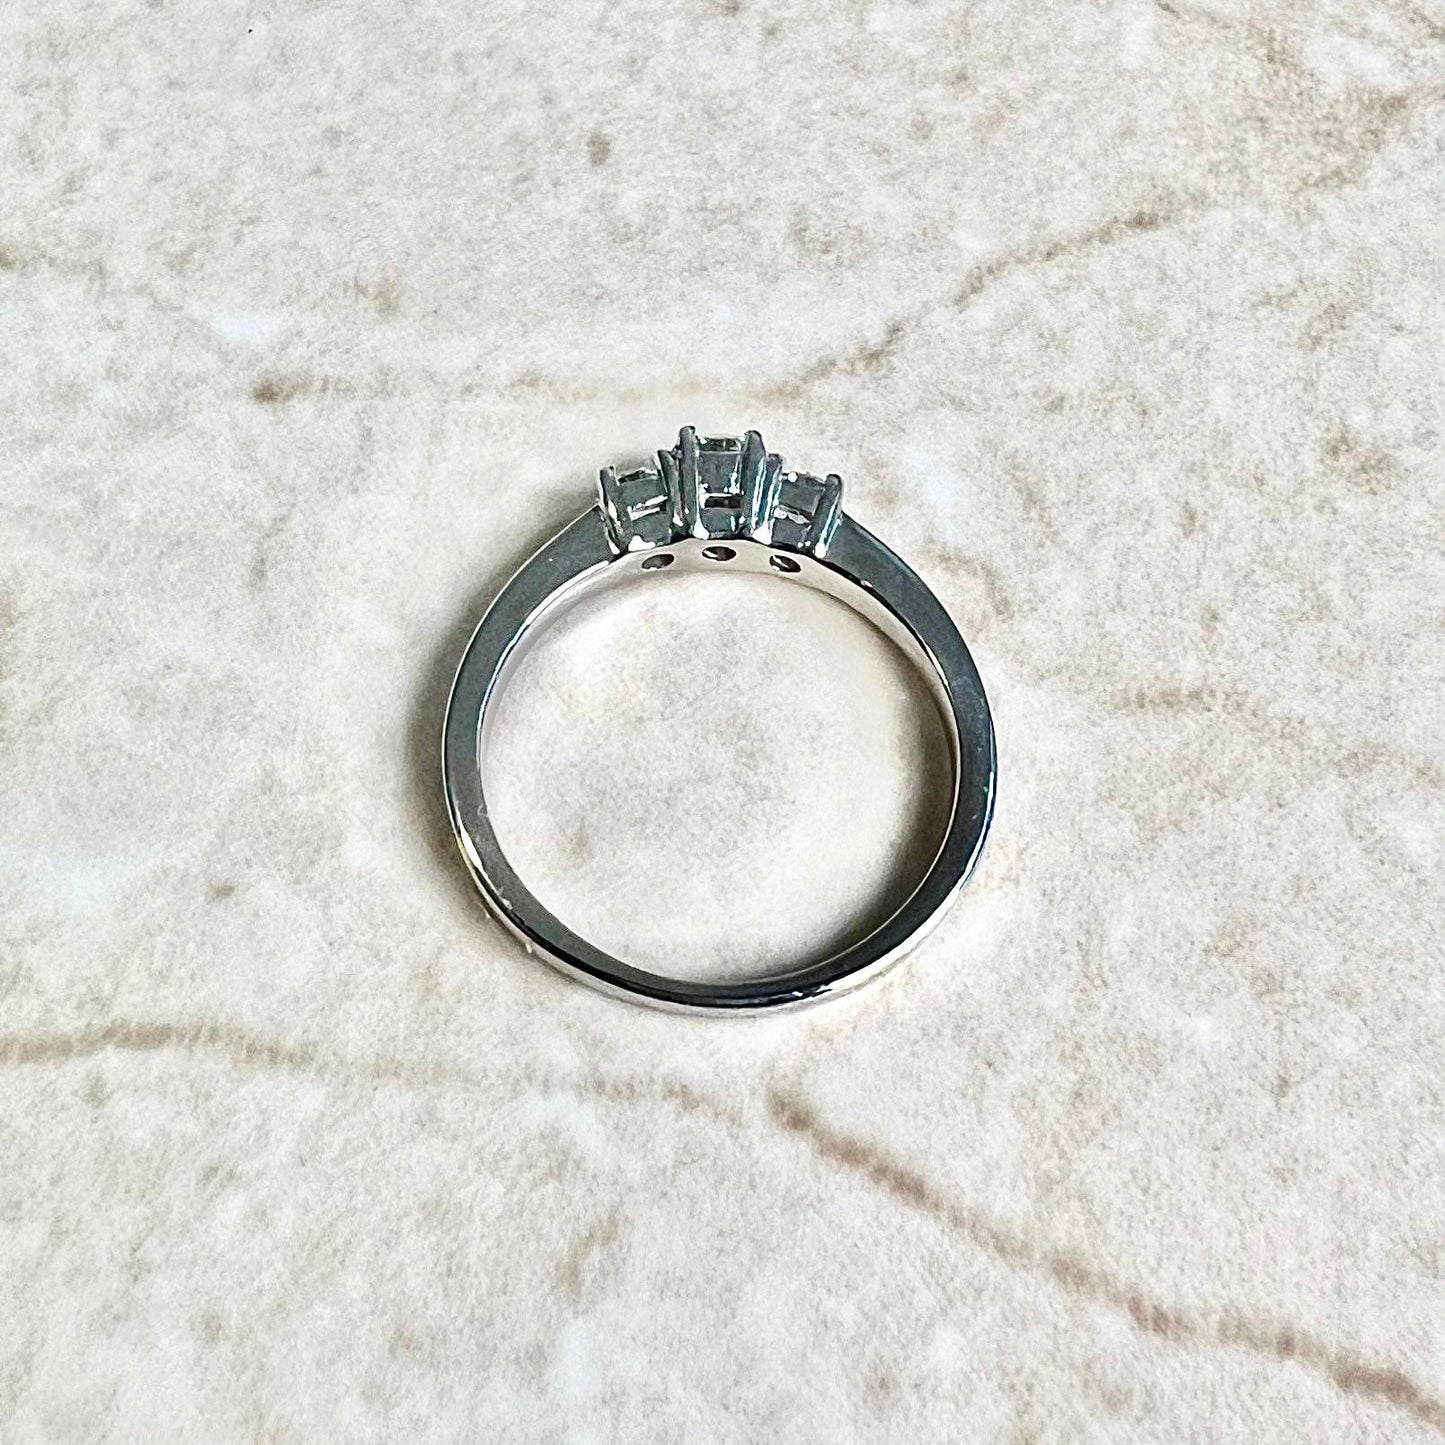 14K 3 Stone Diamond Ring - White Gold Three Stone Engagement Ring - Three Stone Ring - Anniversary Ring - Promise Ring - Best Gifts For Her